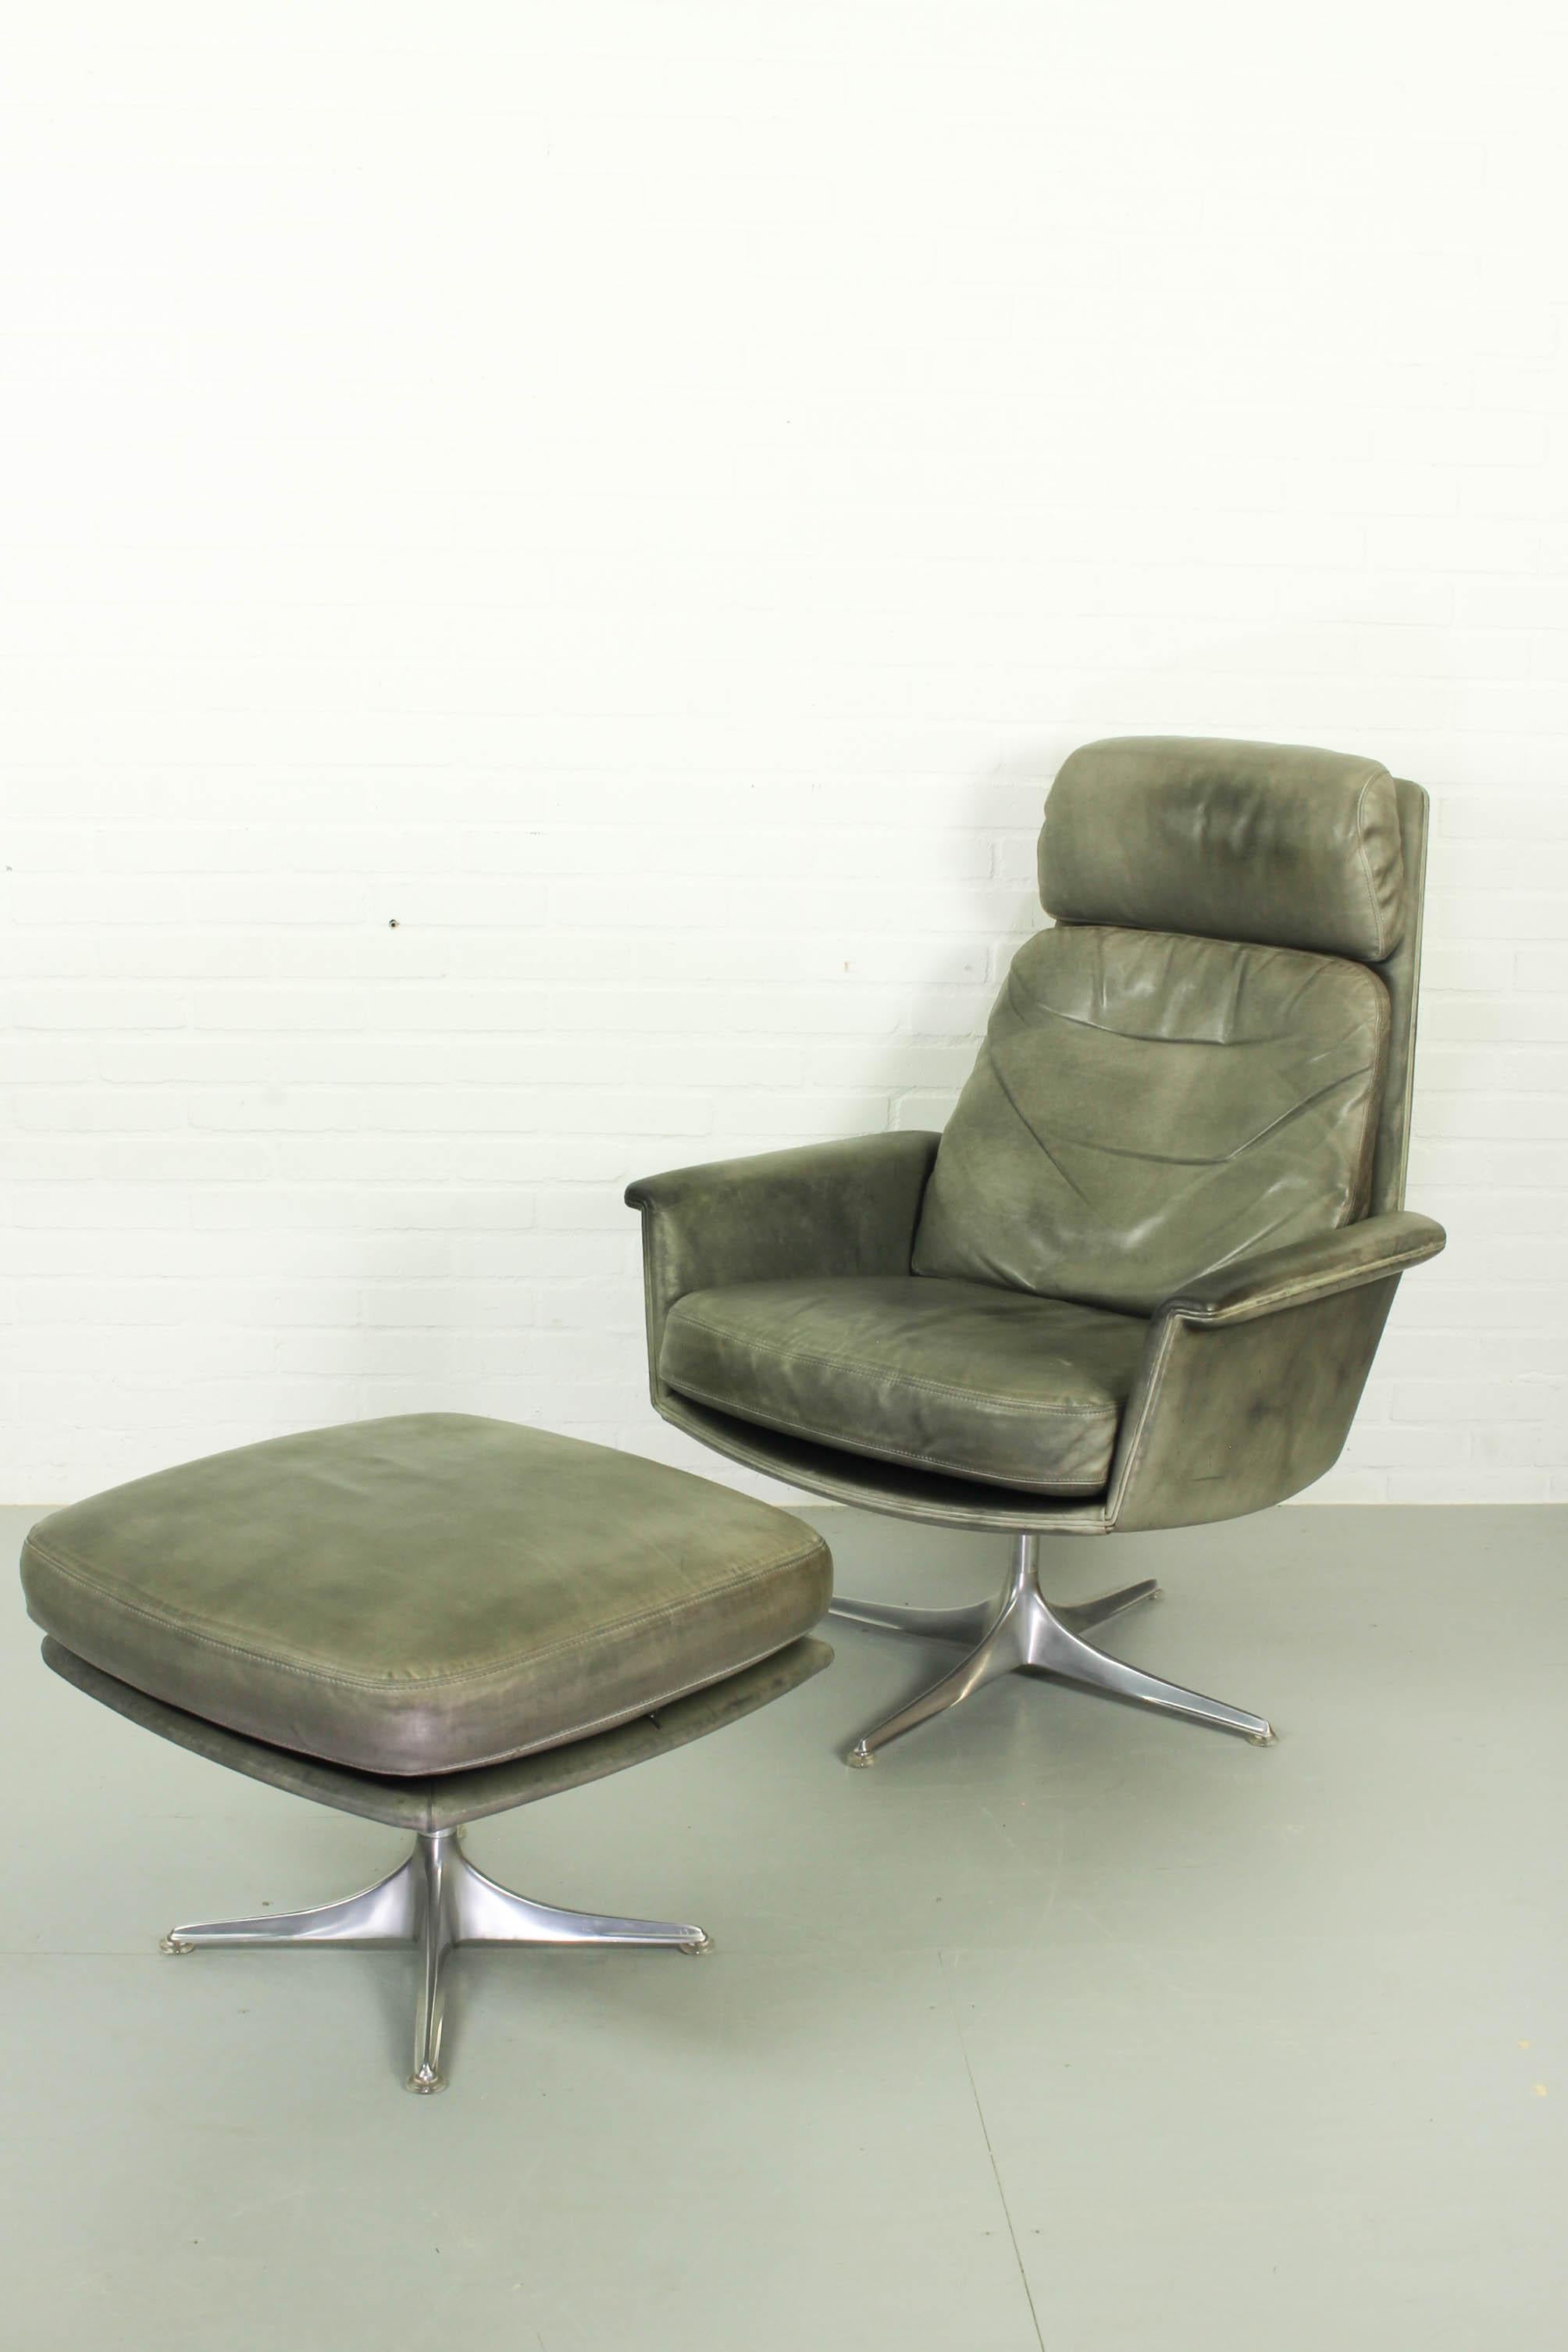 Aluminum Sedia Swivel Highback Chair with Matching Ottoman by Horst Brüning for COR, 1960 For Sale